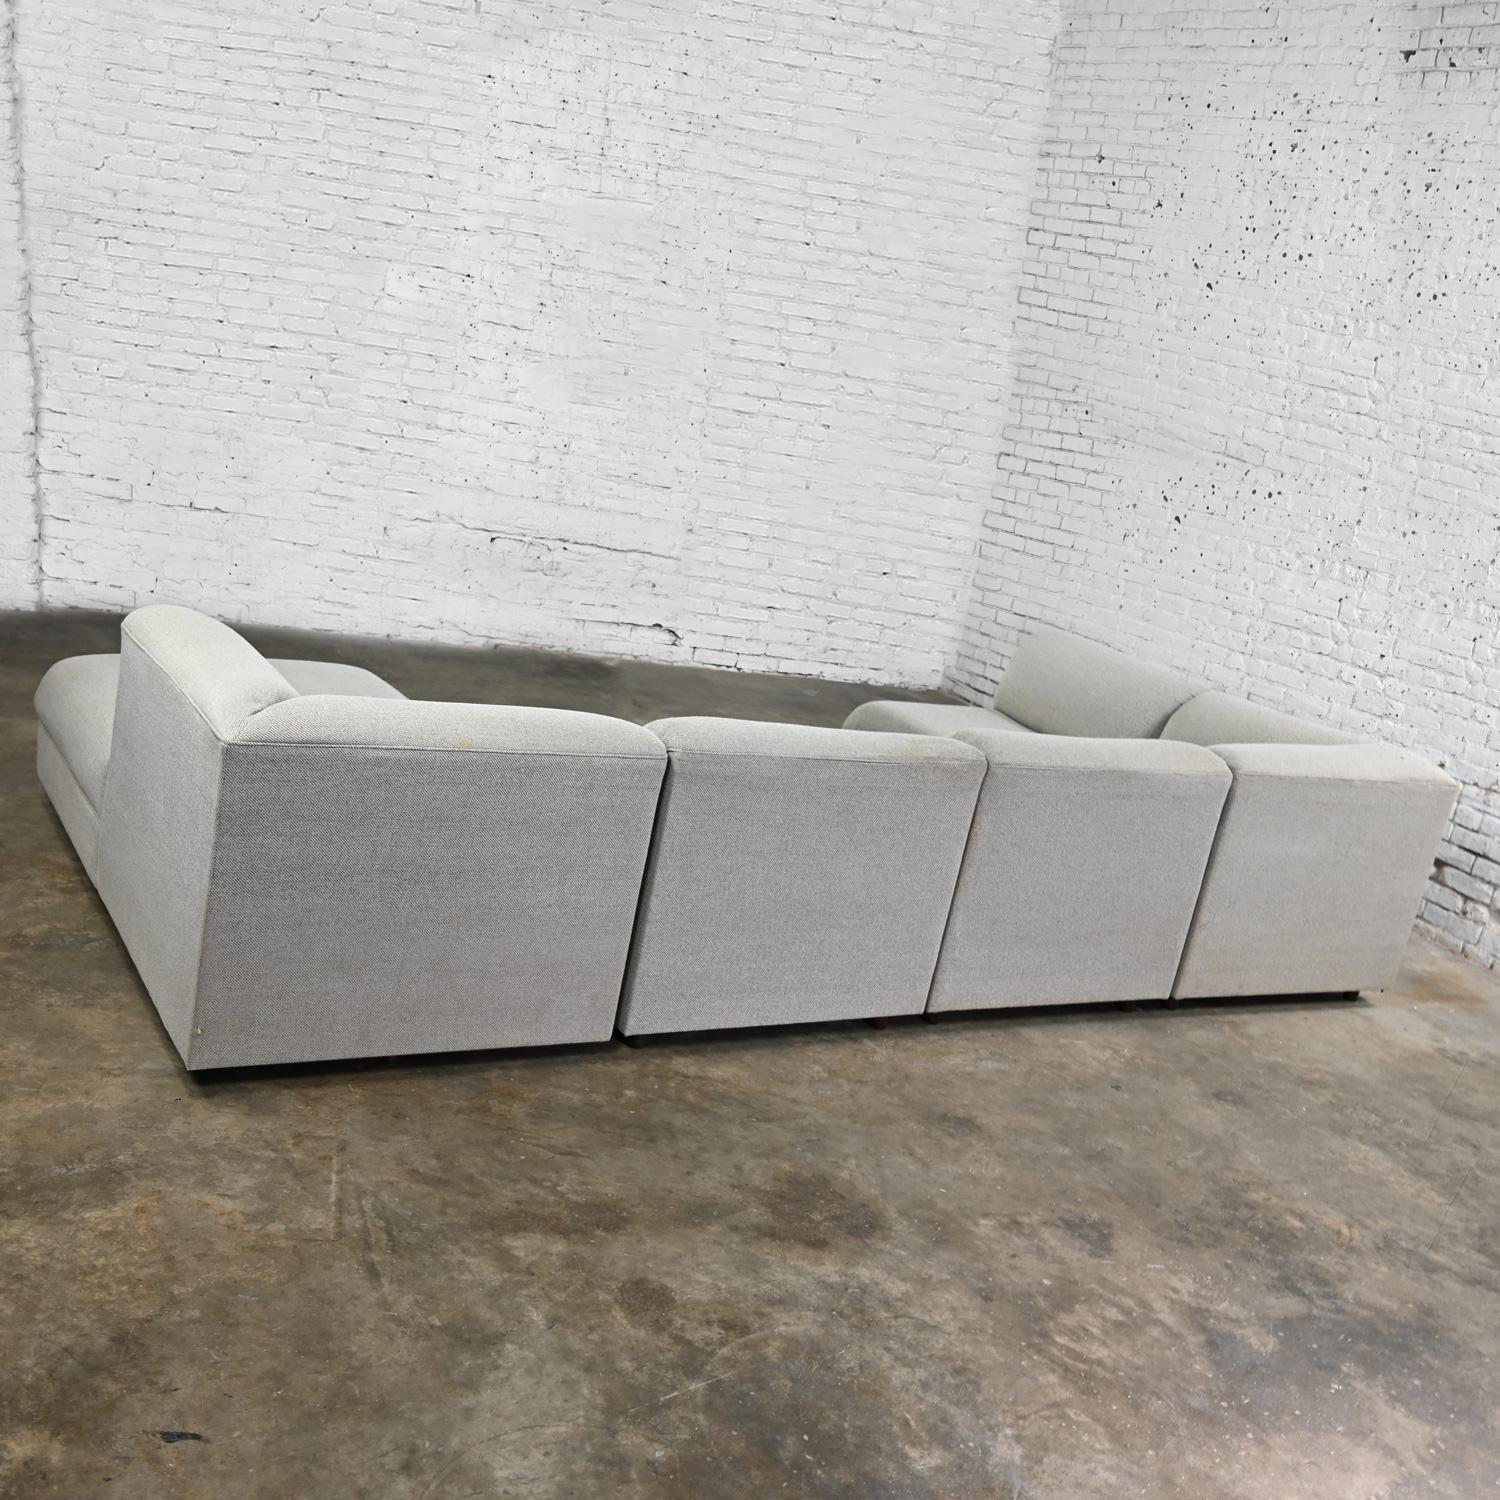 Late 20th Century Modern Modular Sectional Sofa 5 Pieces with Chaise Gray Tweed  For Sale 9